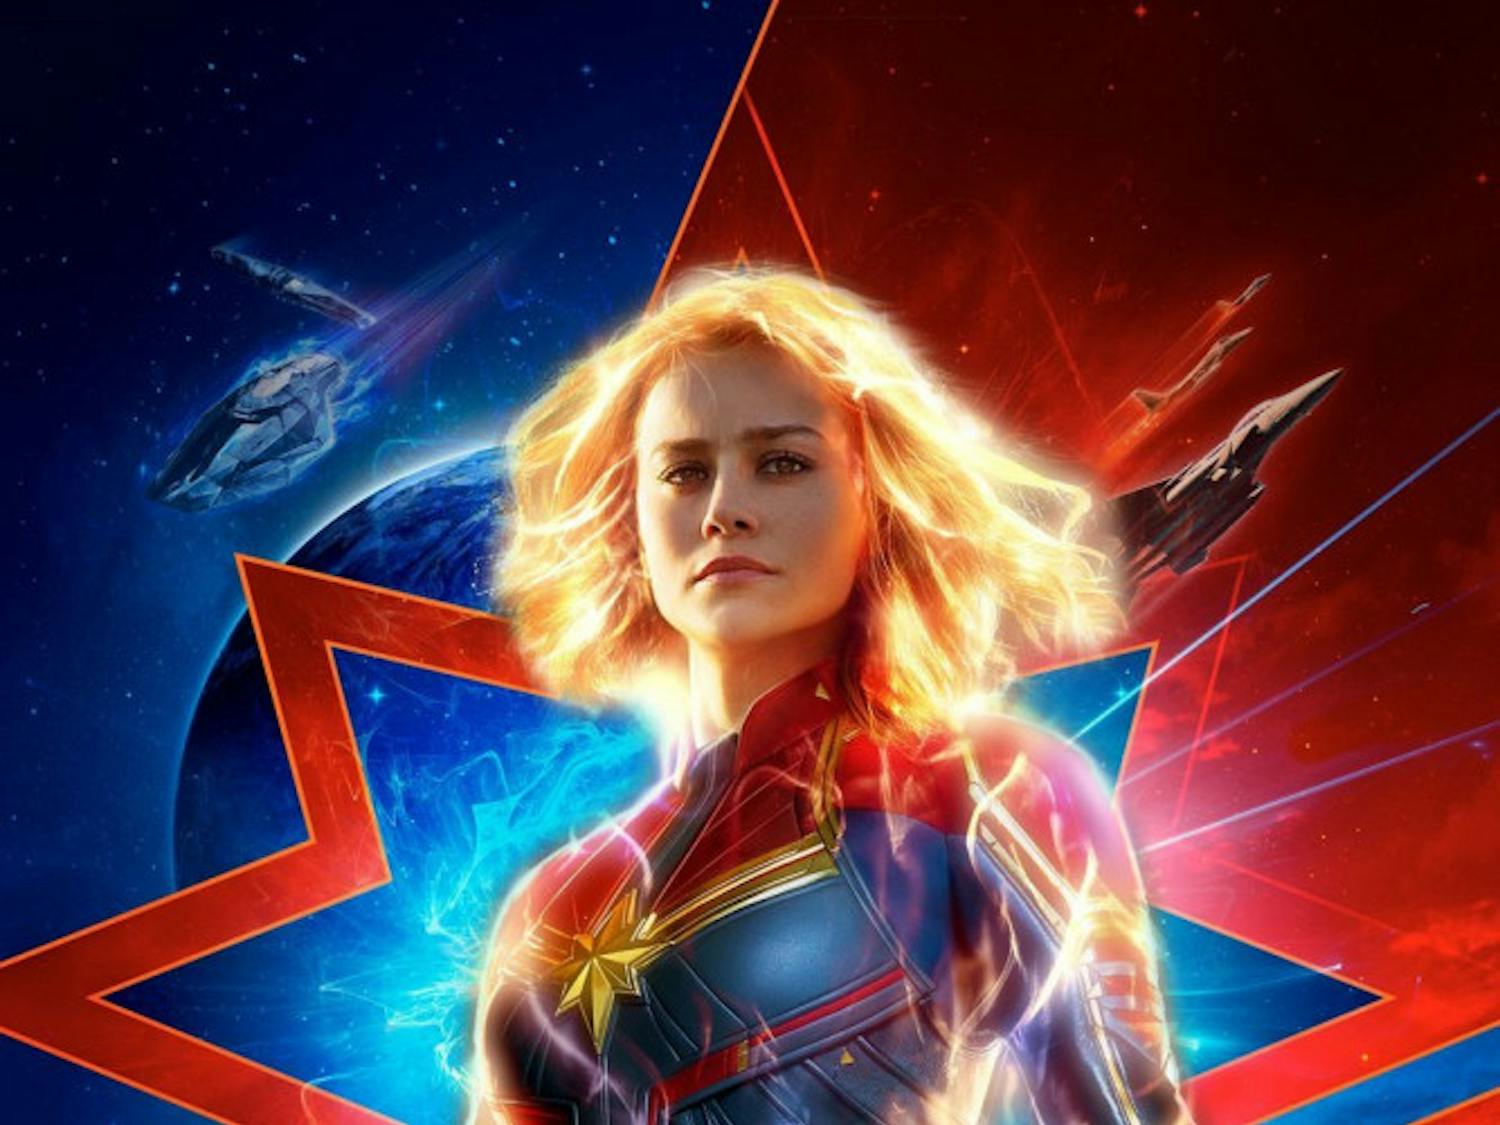 Brie Larson takes on the role of the hero Carol Danvers in Marvel's newest film "Captain Marvel."